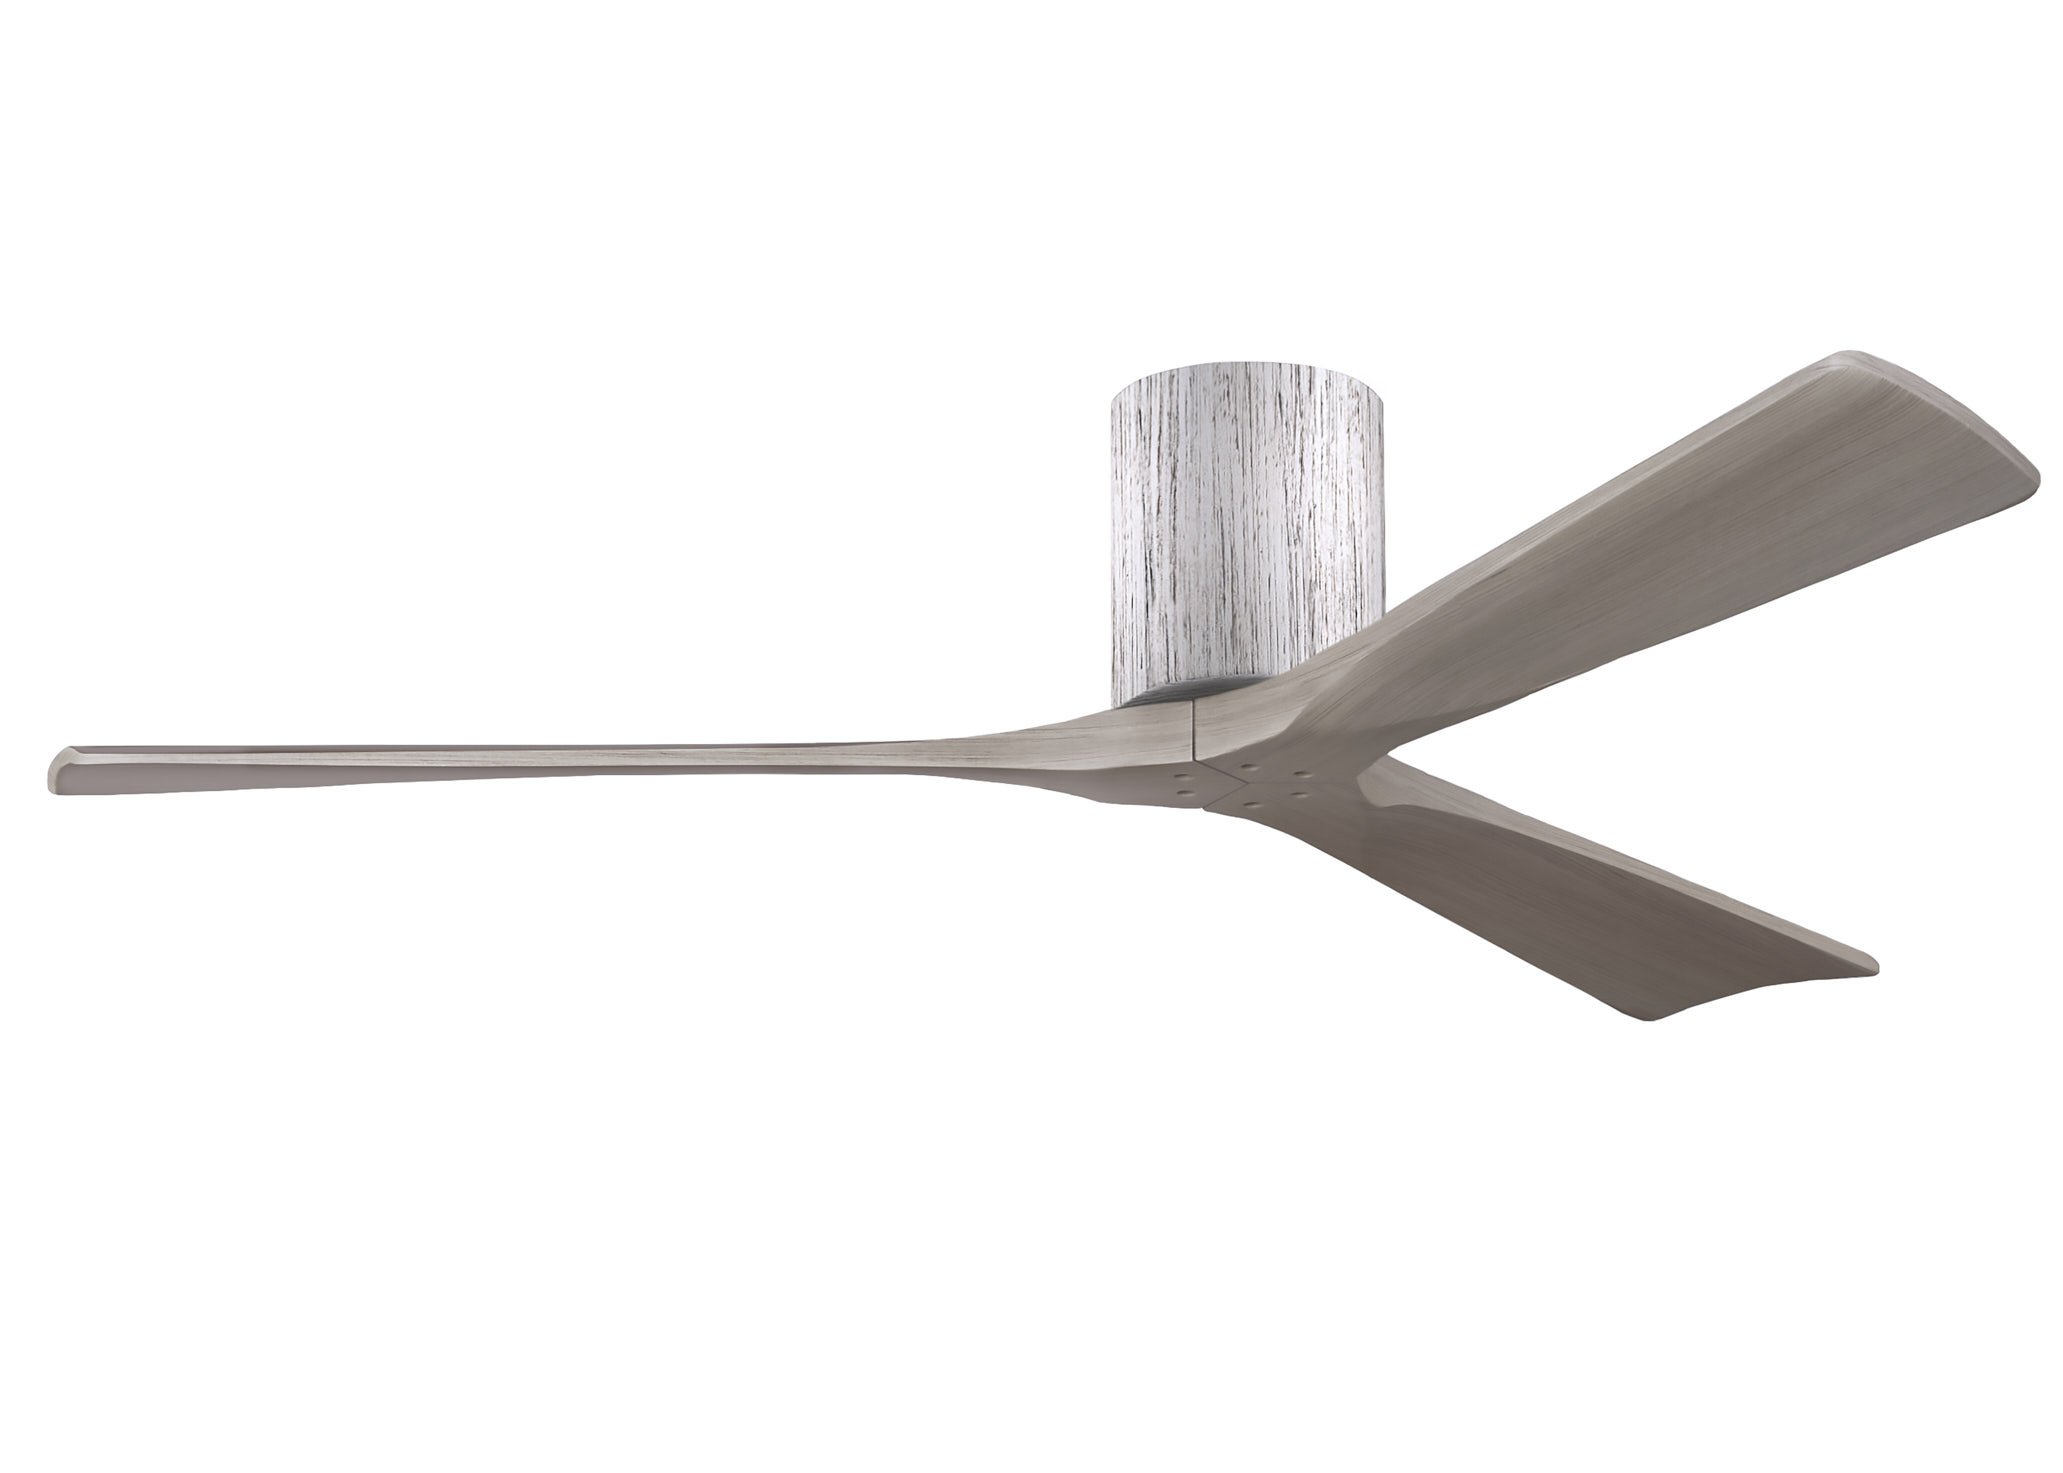 Irene-3H 6-speed ceiling fan in barn wood finish with 60